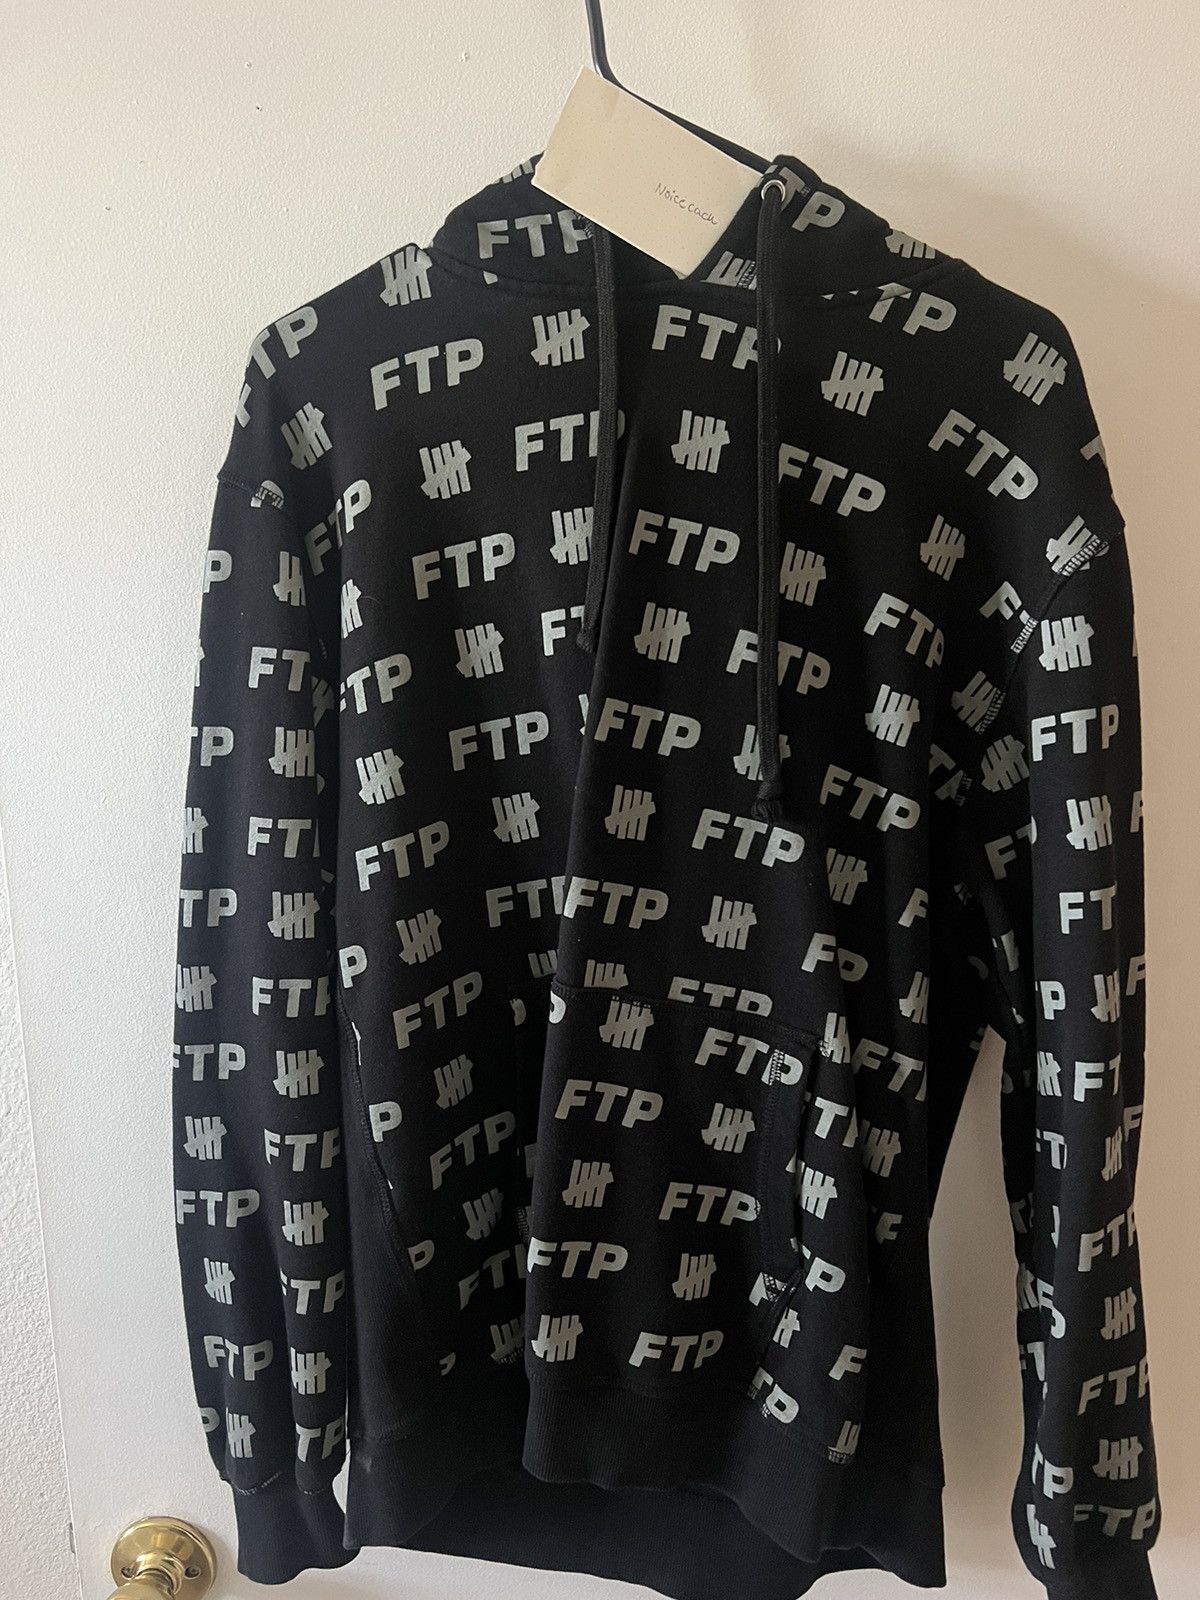 Undefeated FTP x Undefeated All over hoodie | Grailed